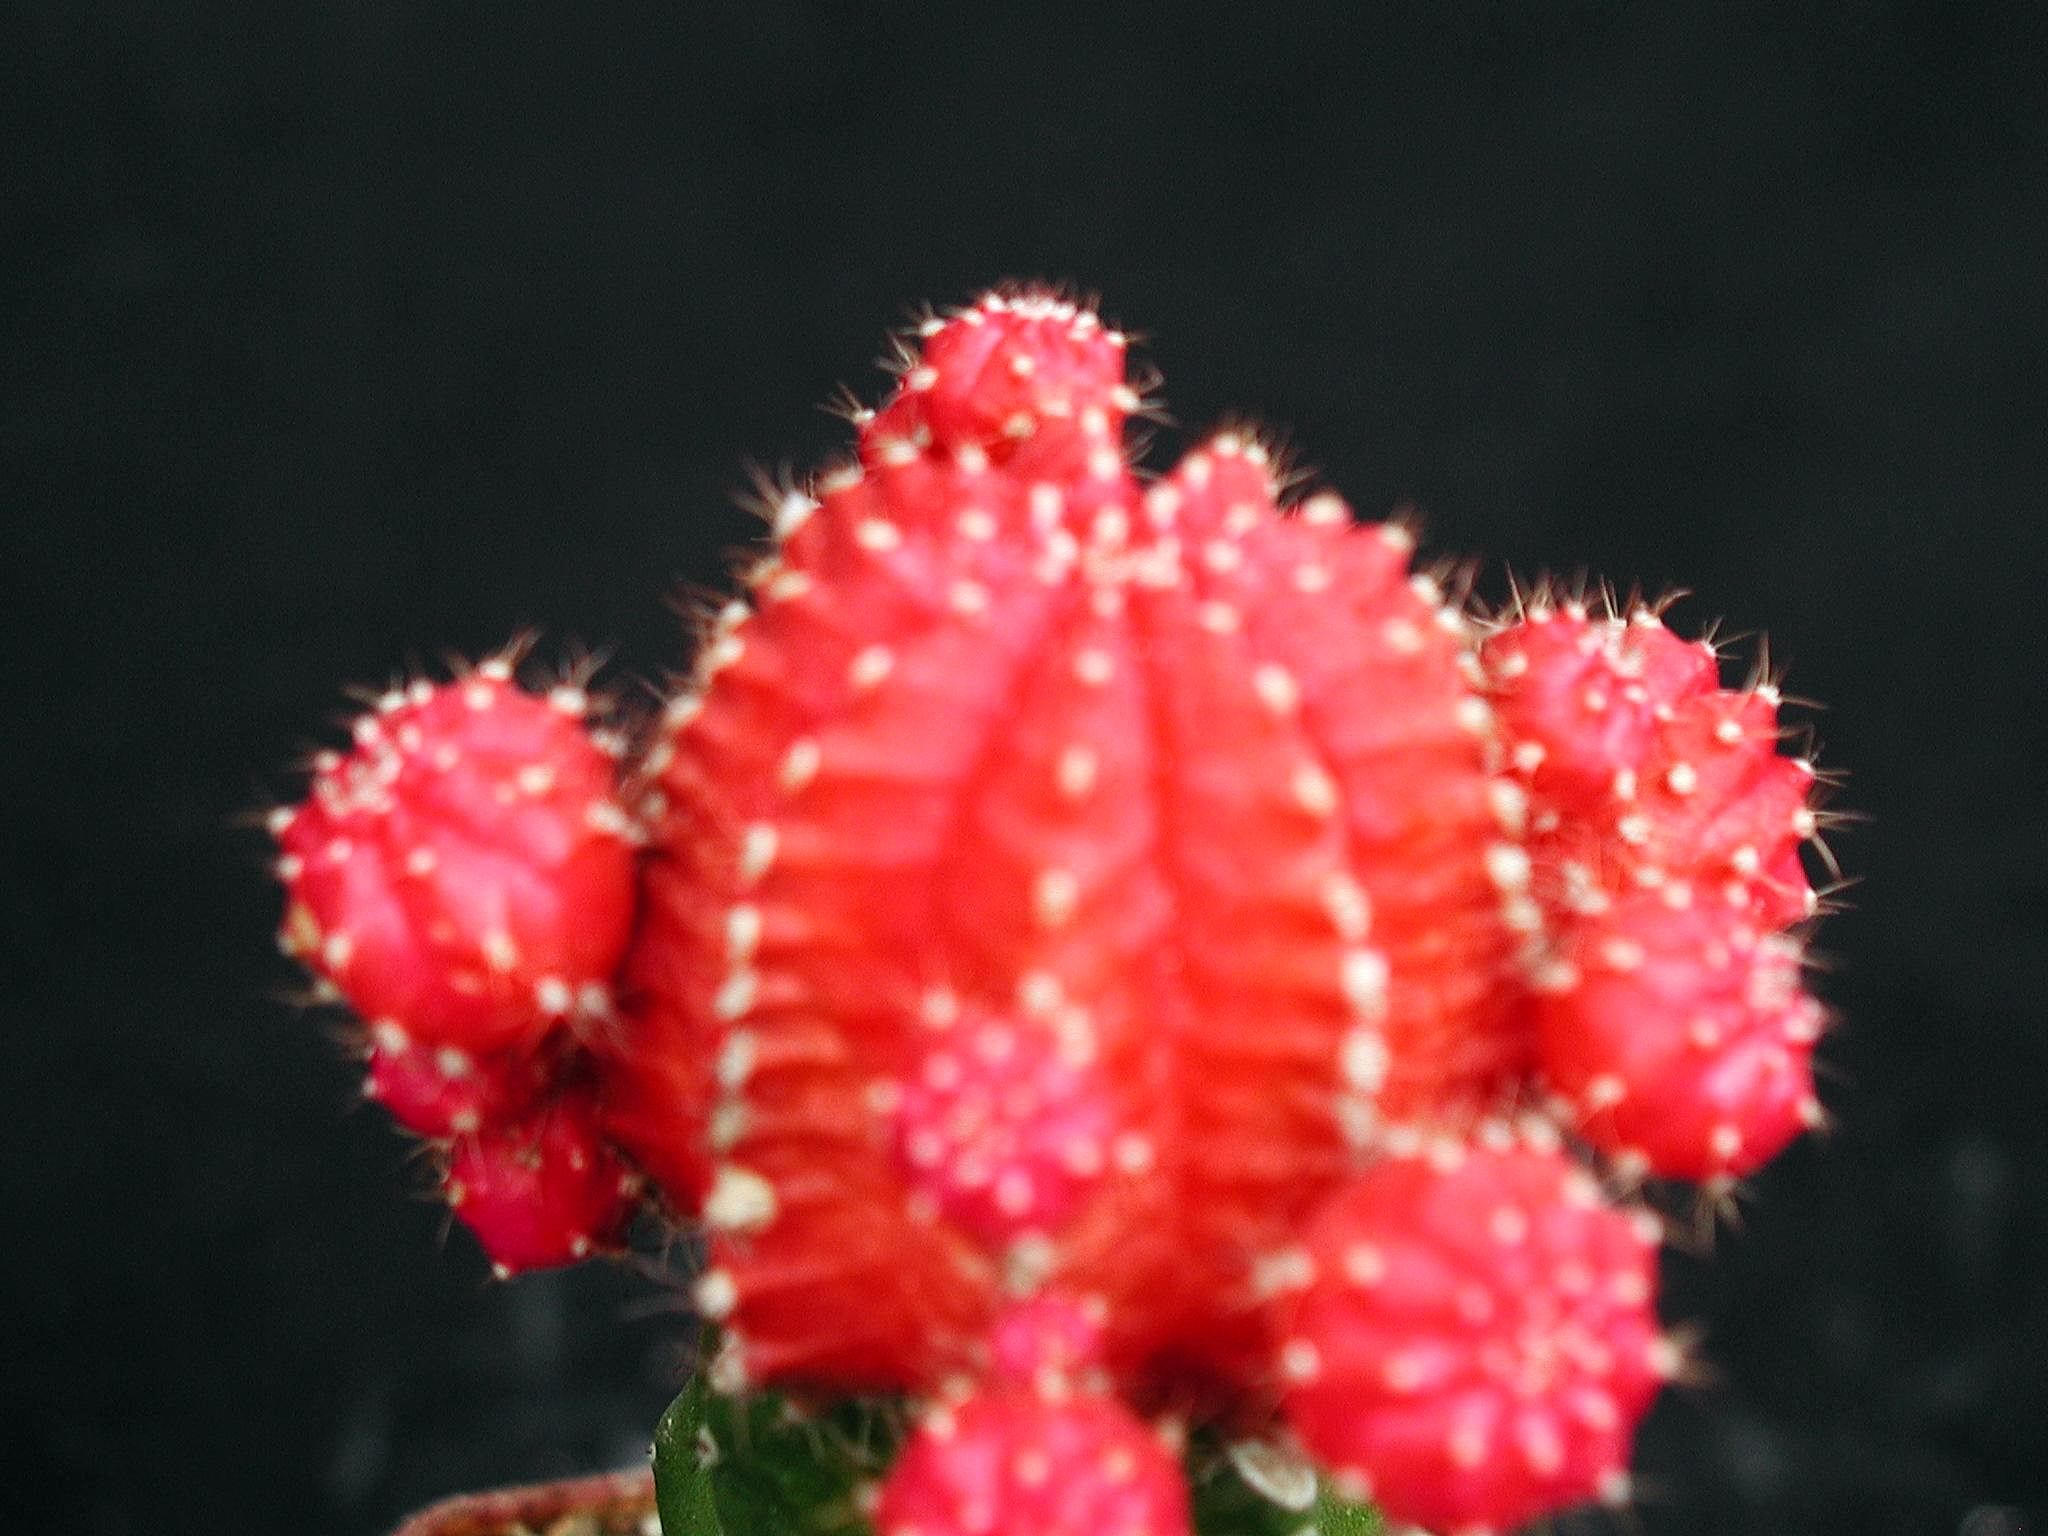 File:Cactus flower picture.jpg - Wikimedia Commons